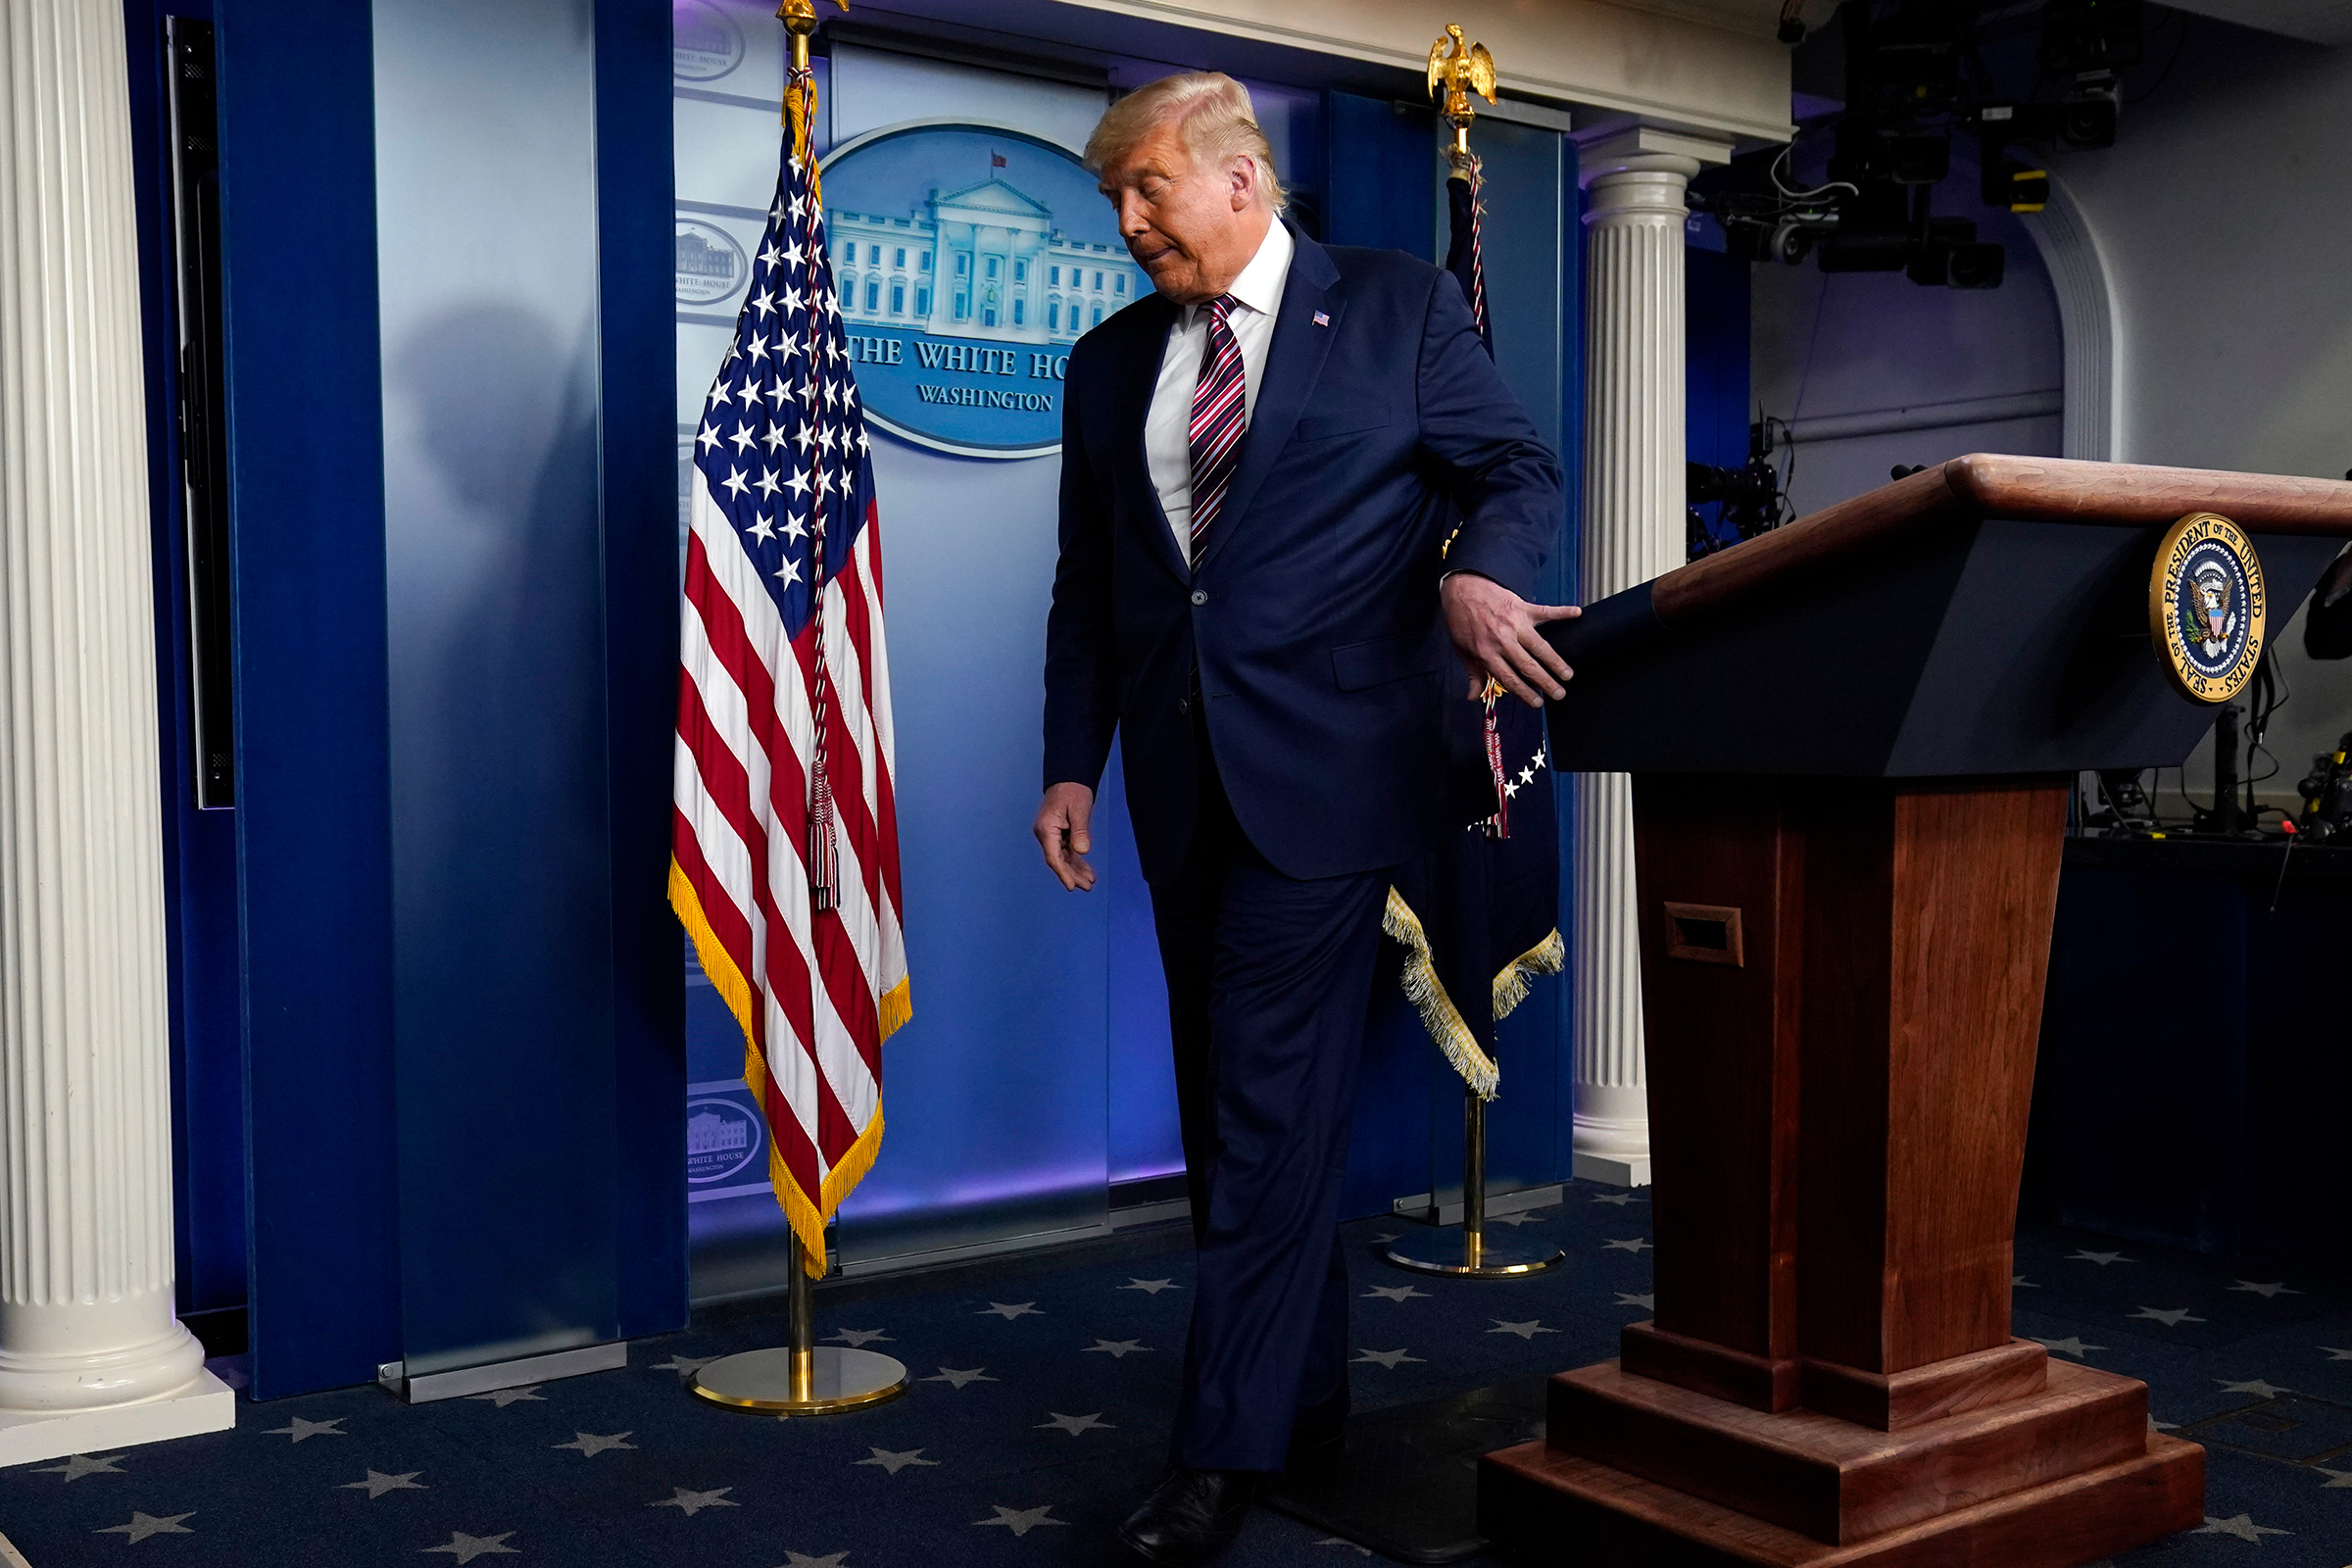 President Donald Trump leaves the podium after speaking at the White House on Nov. 5, 2020.